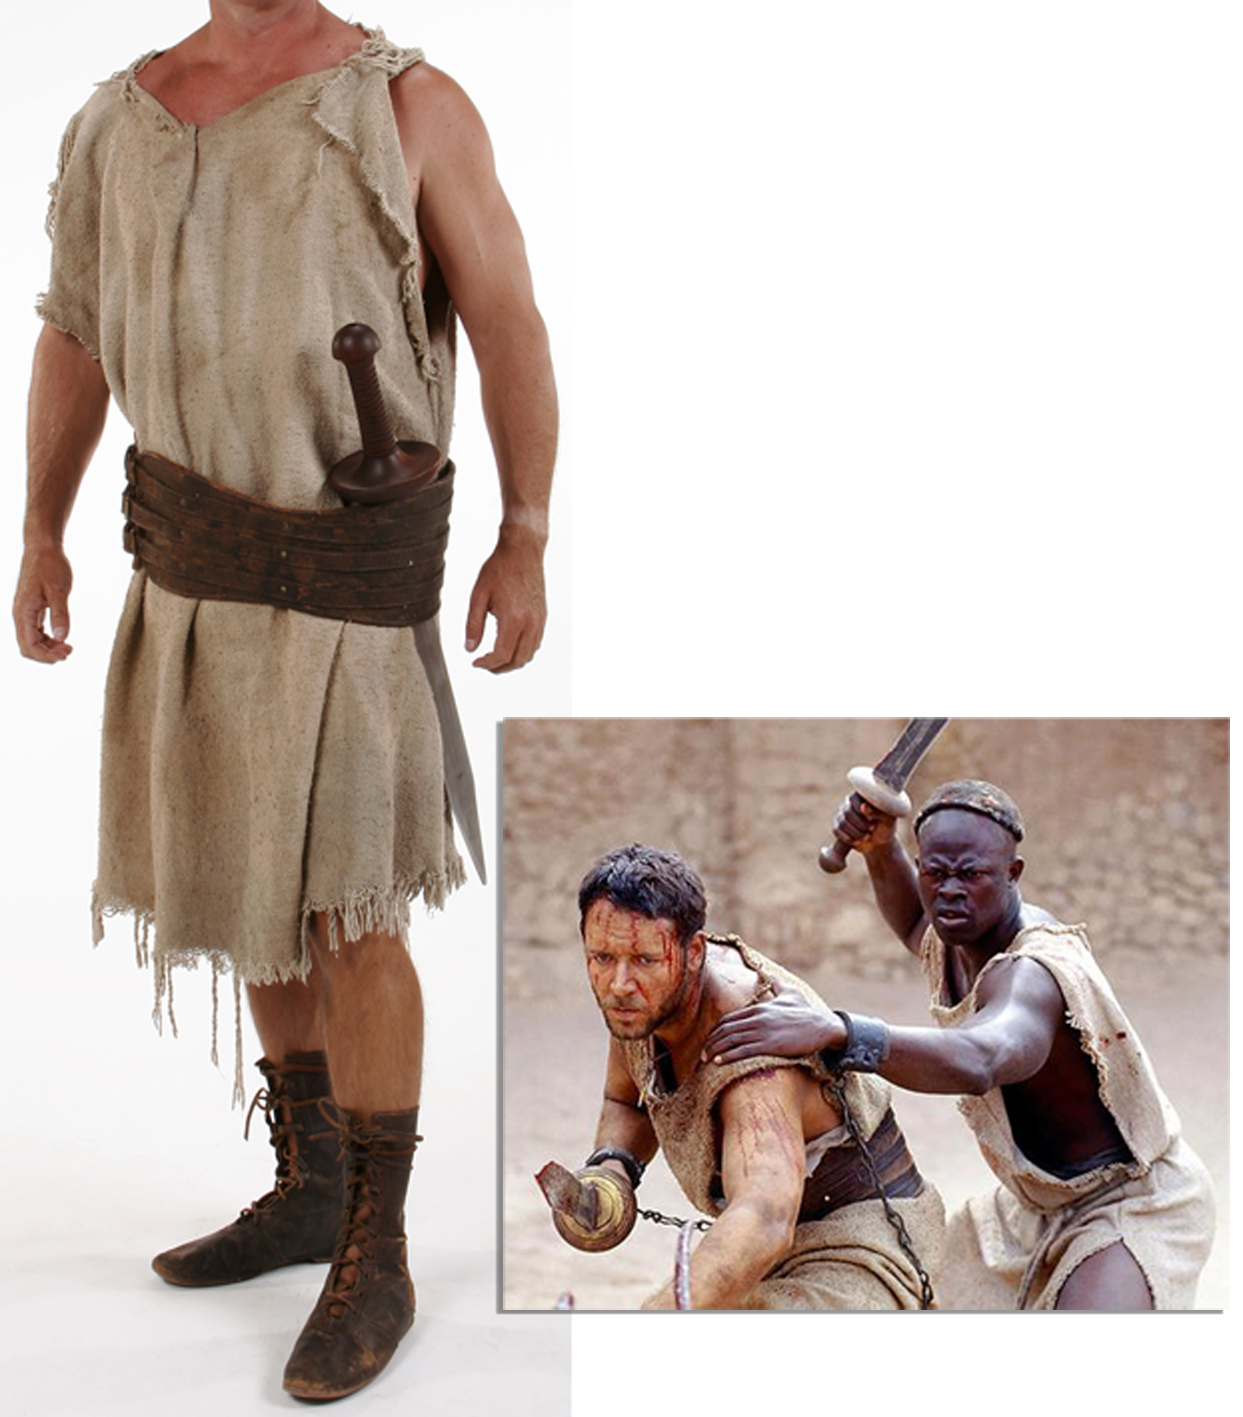 Gladiator Costume Auction Nets $15,786 for Crowe Costume at Nate